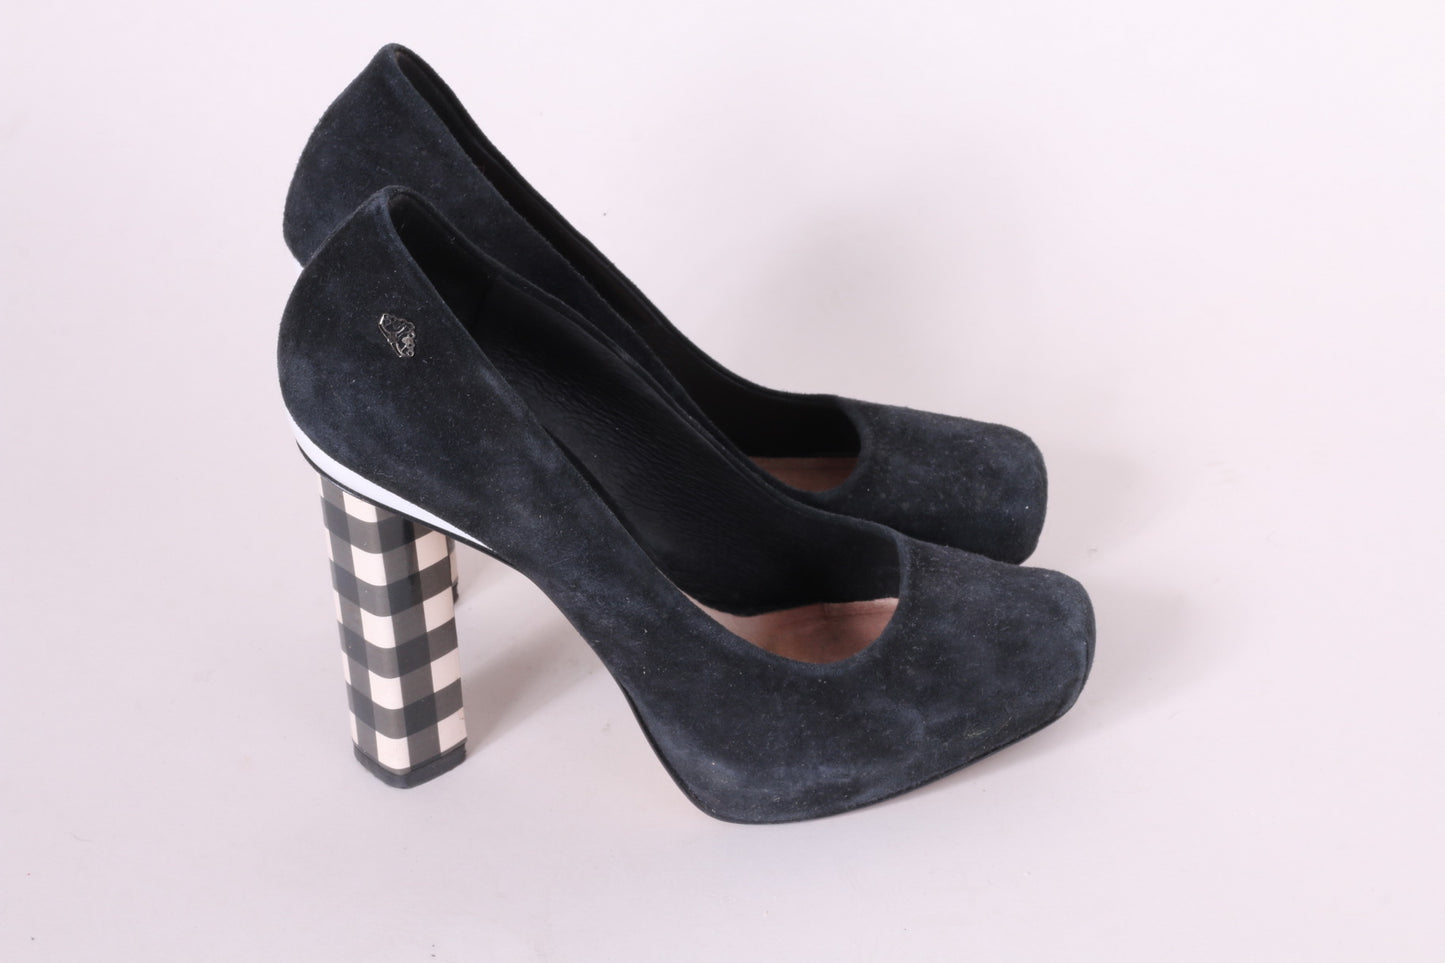 Fornarina Women's 39 Heels Black Suede Beige Check Heels Shoes Made in Italy